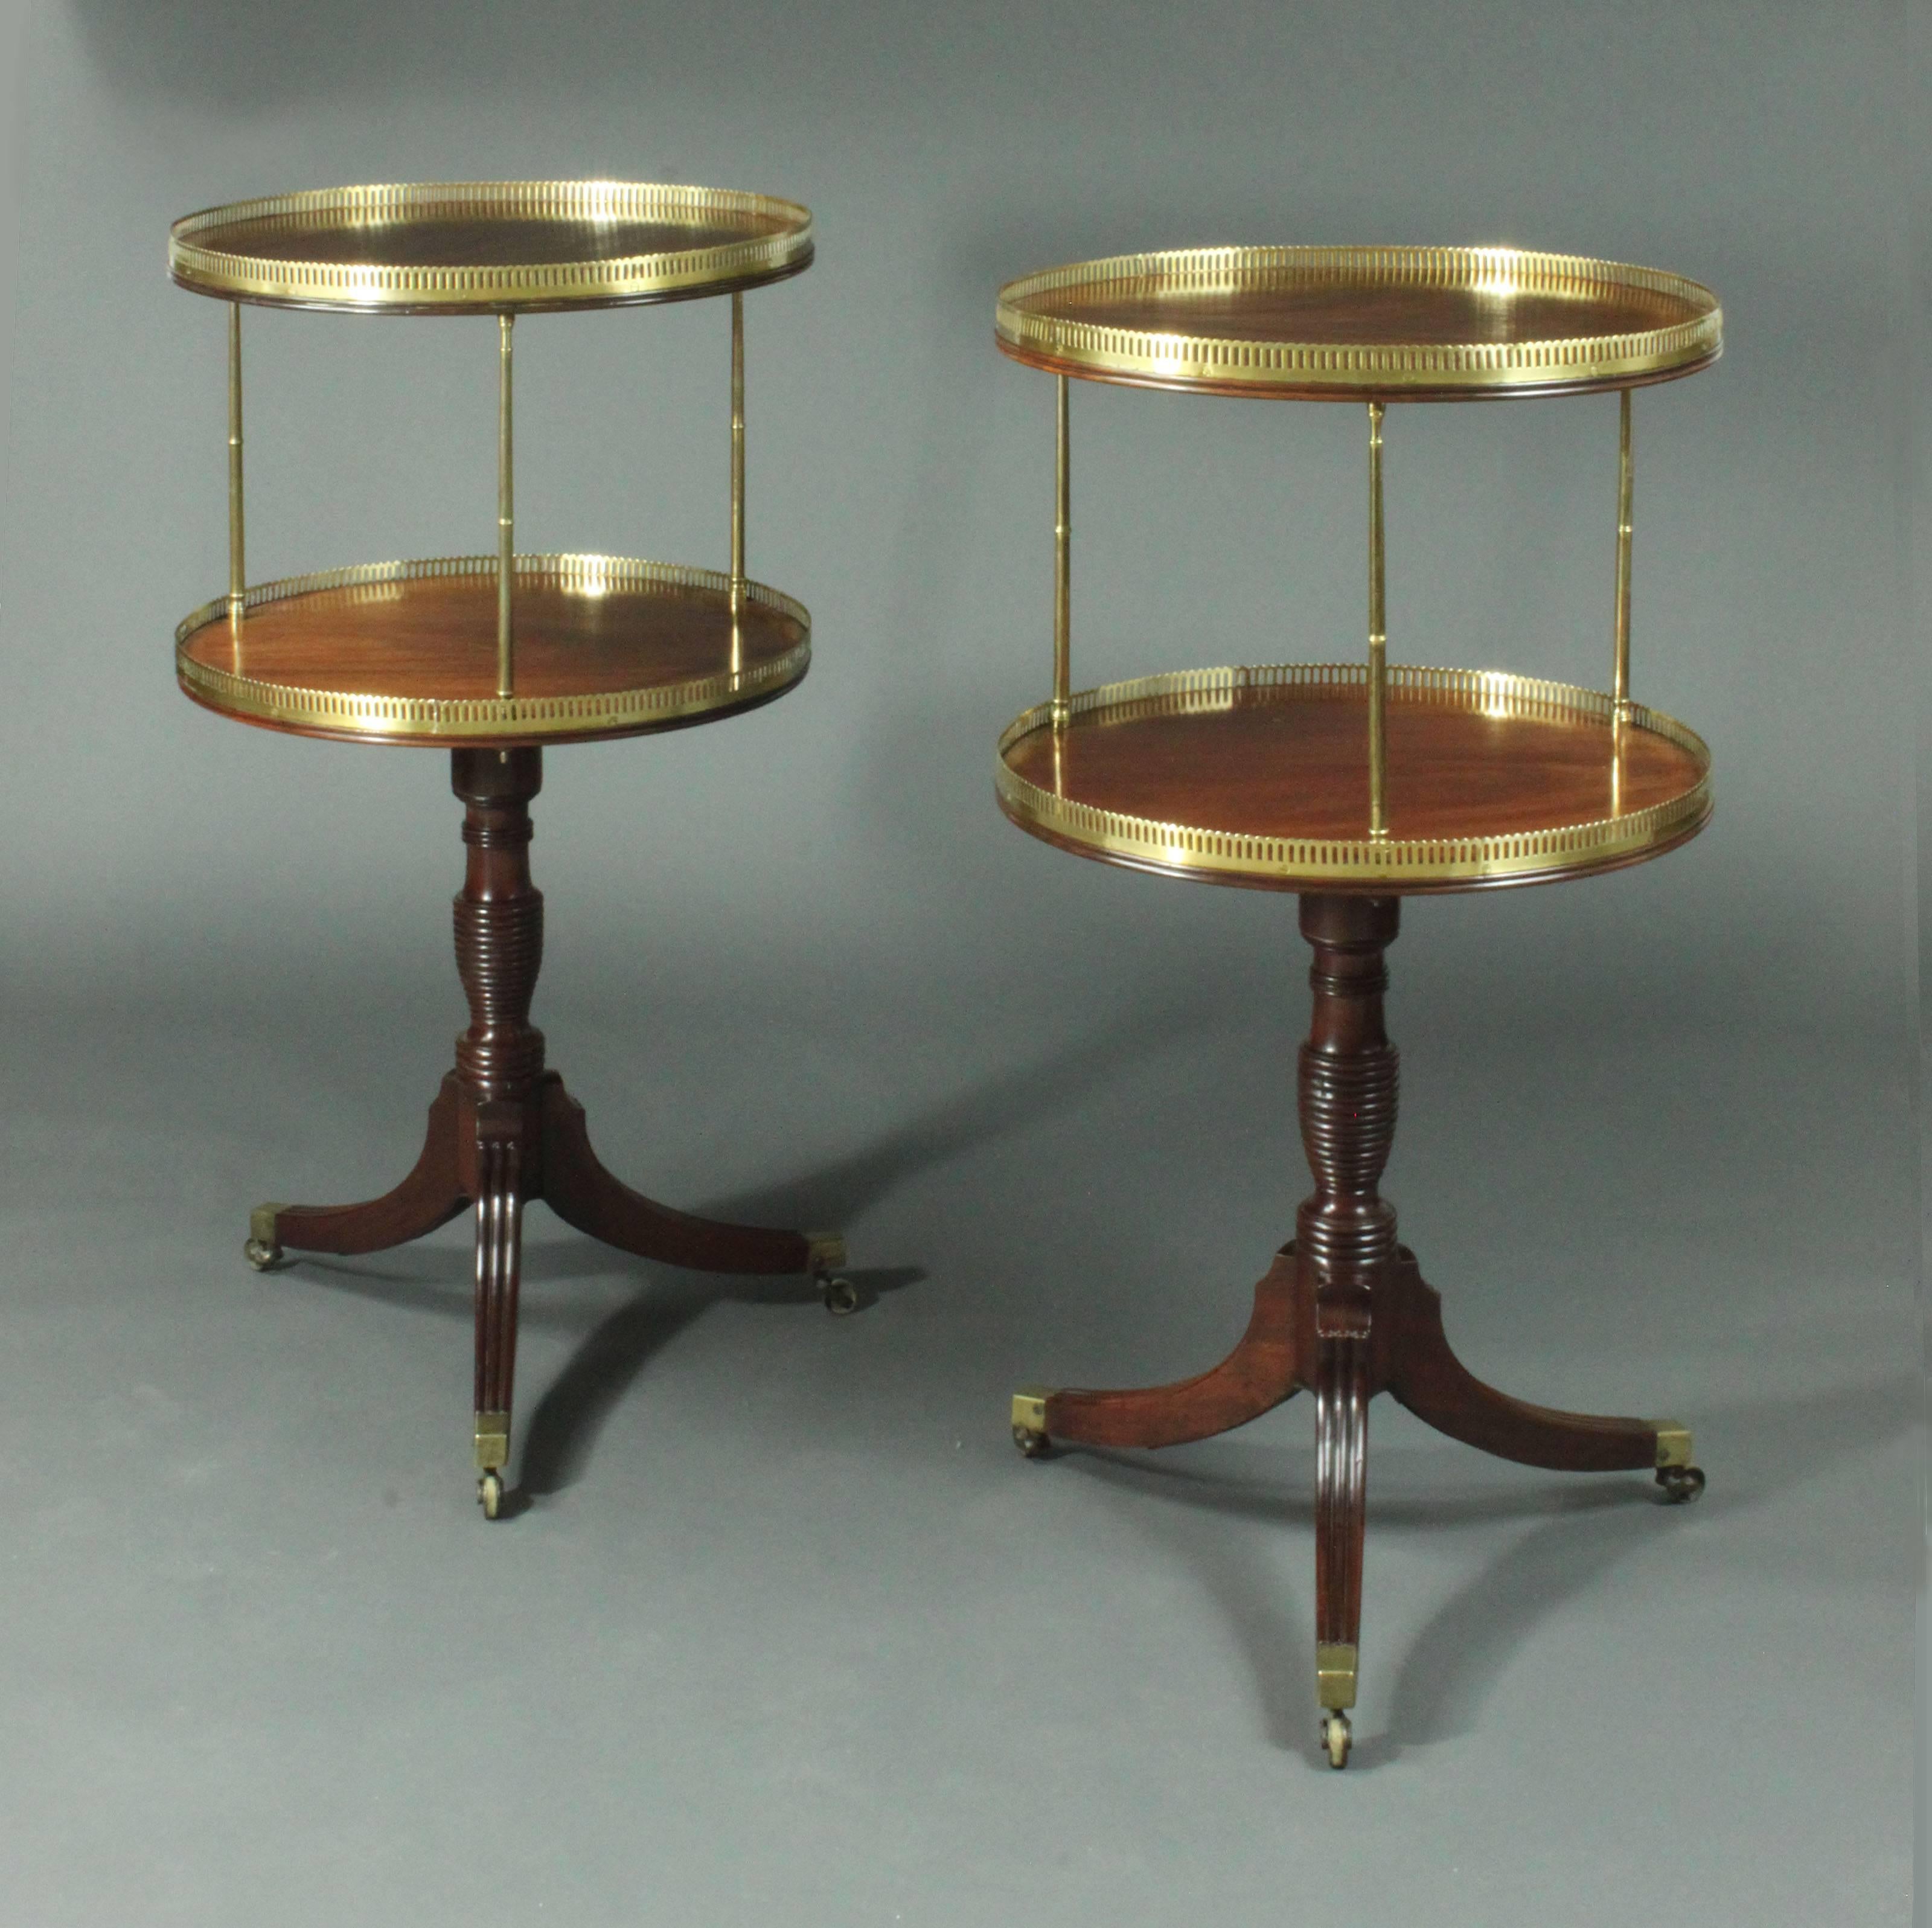 Antique Pair of Dumb Waiters with Brass Pillars and Galleries In Good Condition In Bradford-on-Avon, Wiltshire